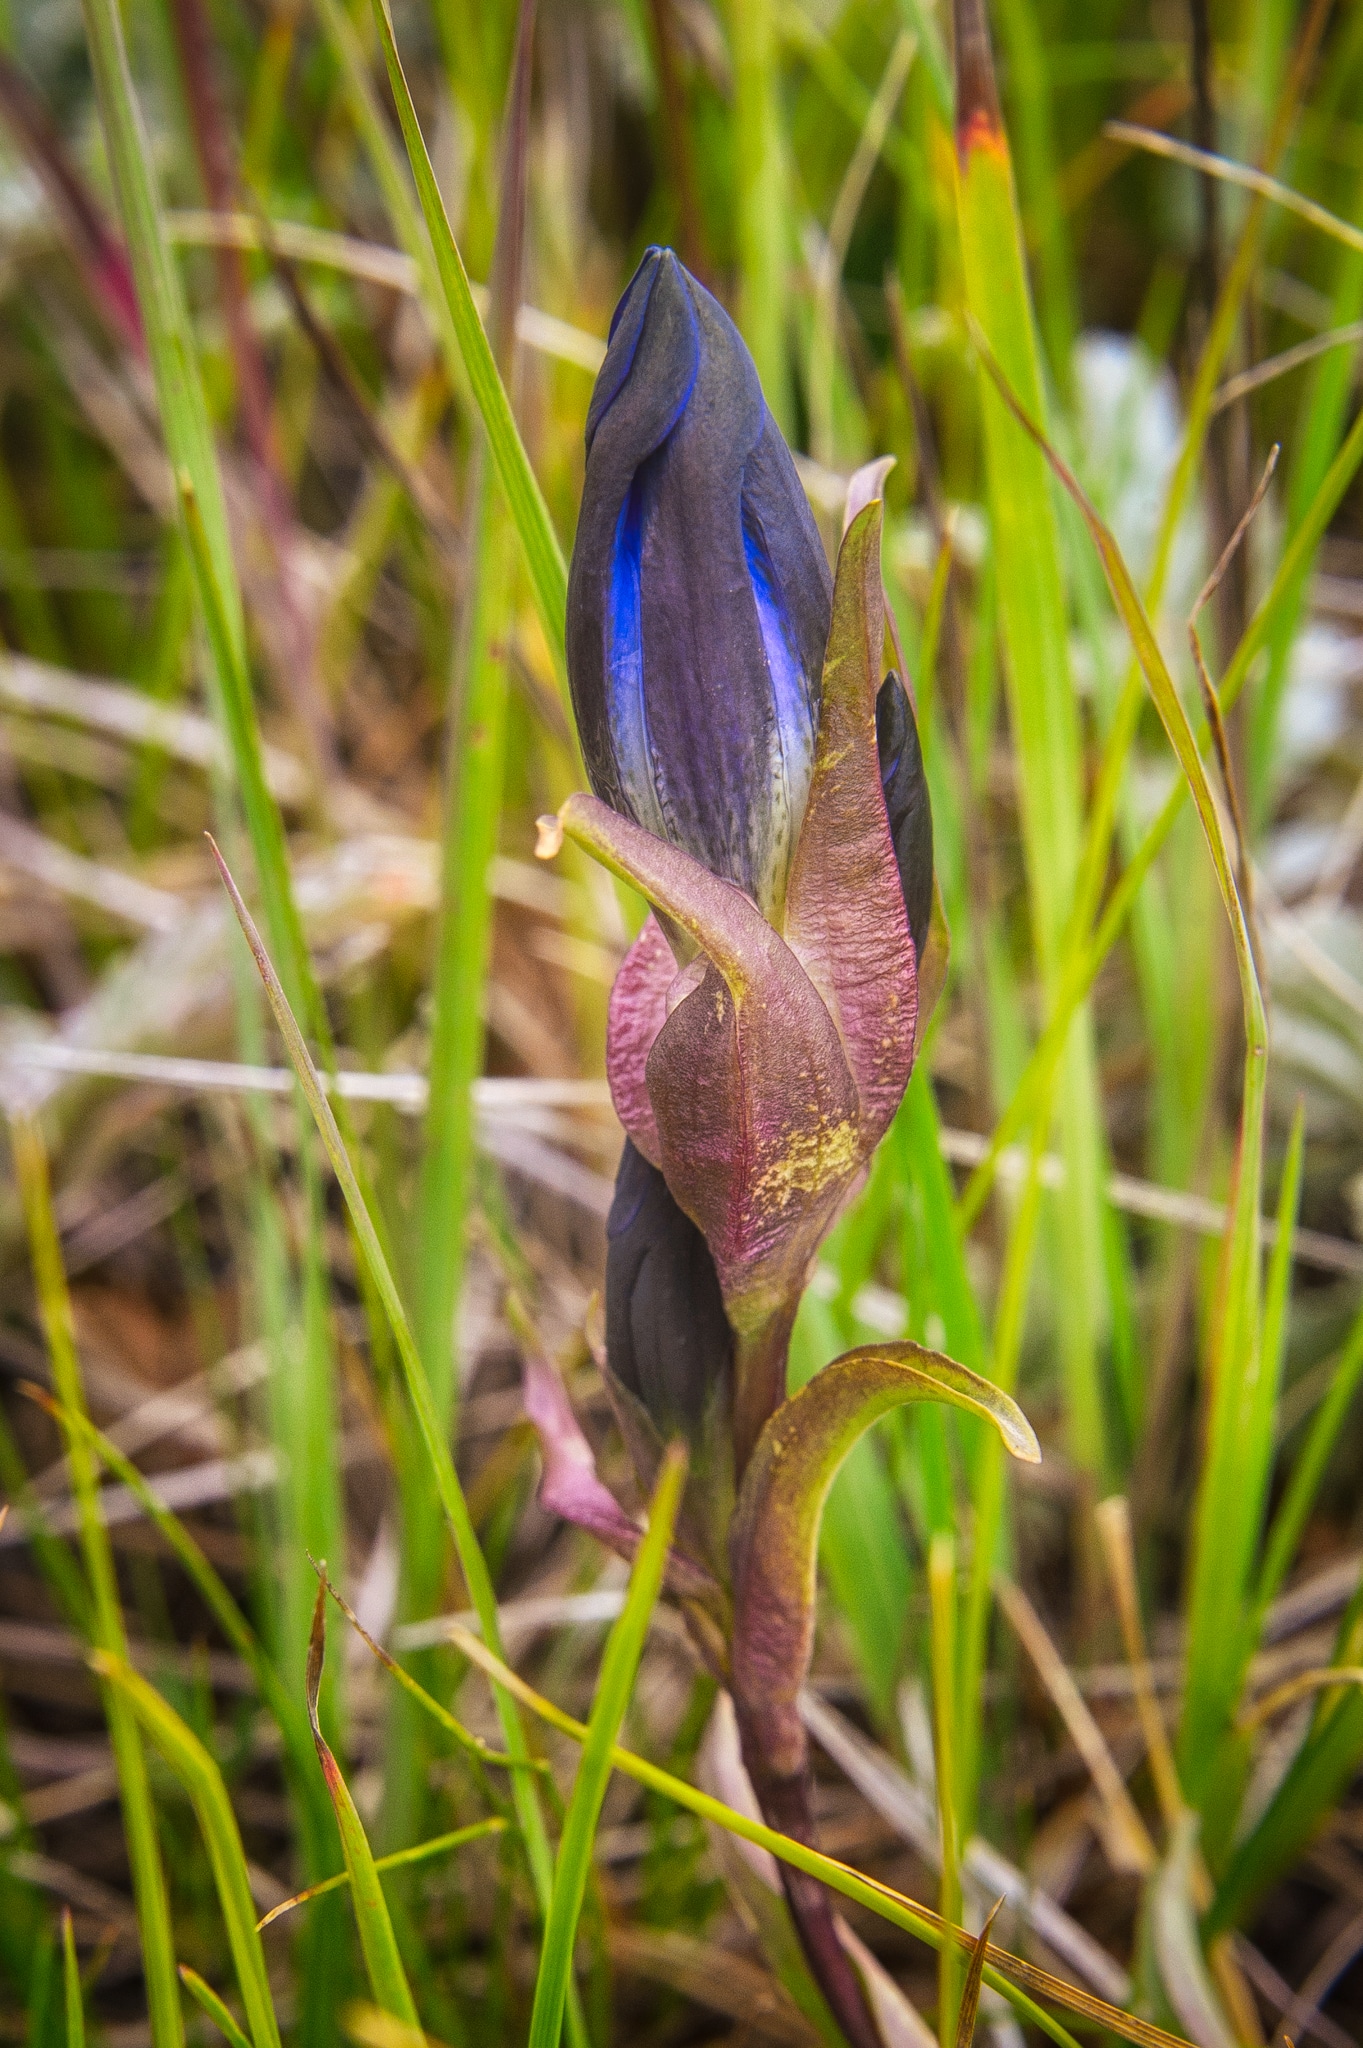 This Gentian was growing in the grassy meadow adjacent to North Clear Creek Falls, just off CO 149 between Lake City and Creede, Colorado. It was a cloudy day, so the purple-blue Gentian flower did not open up.